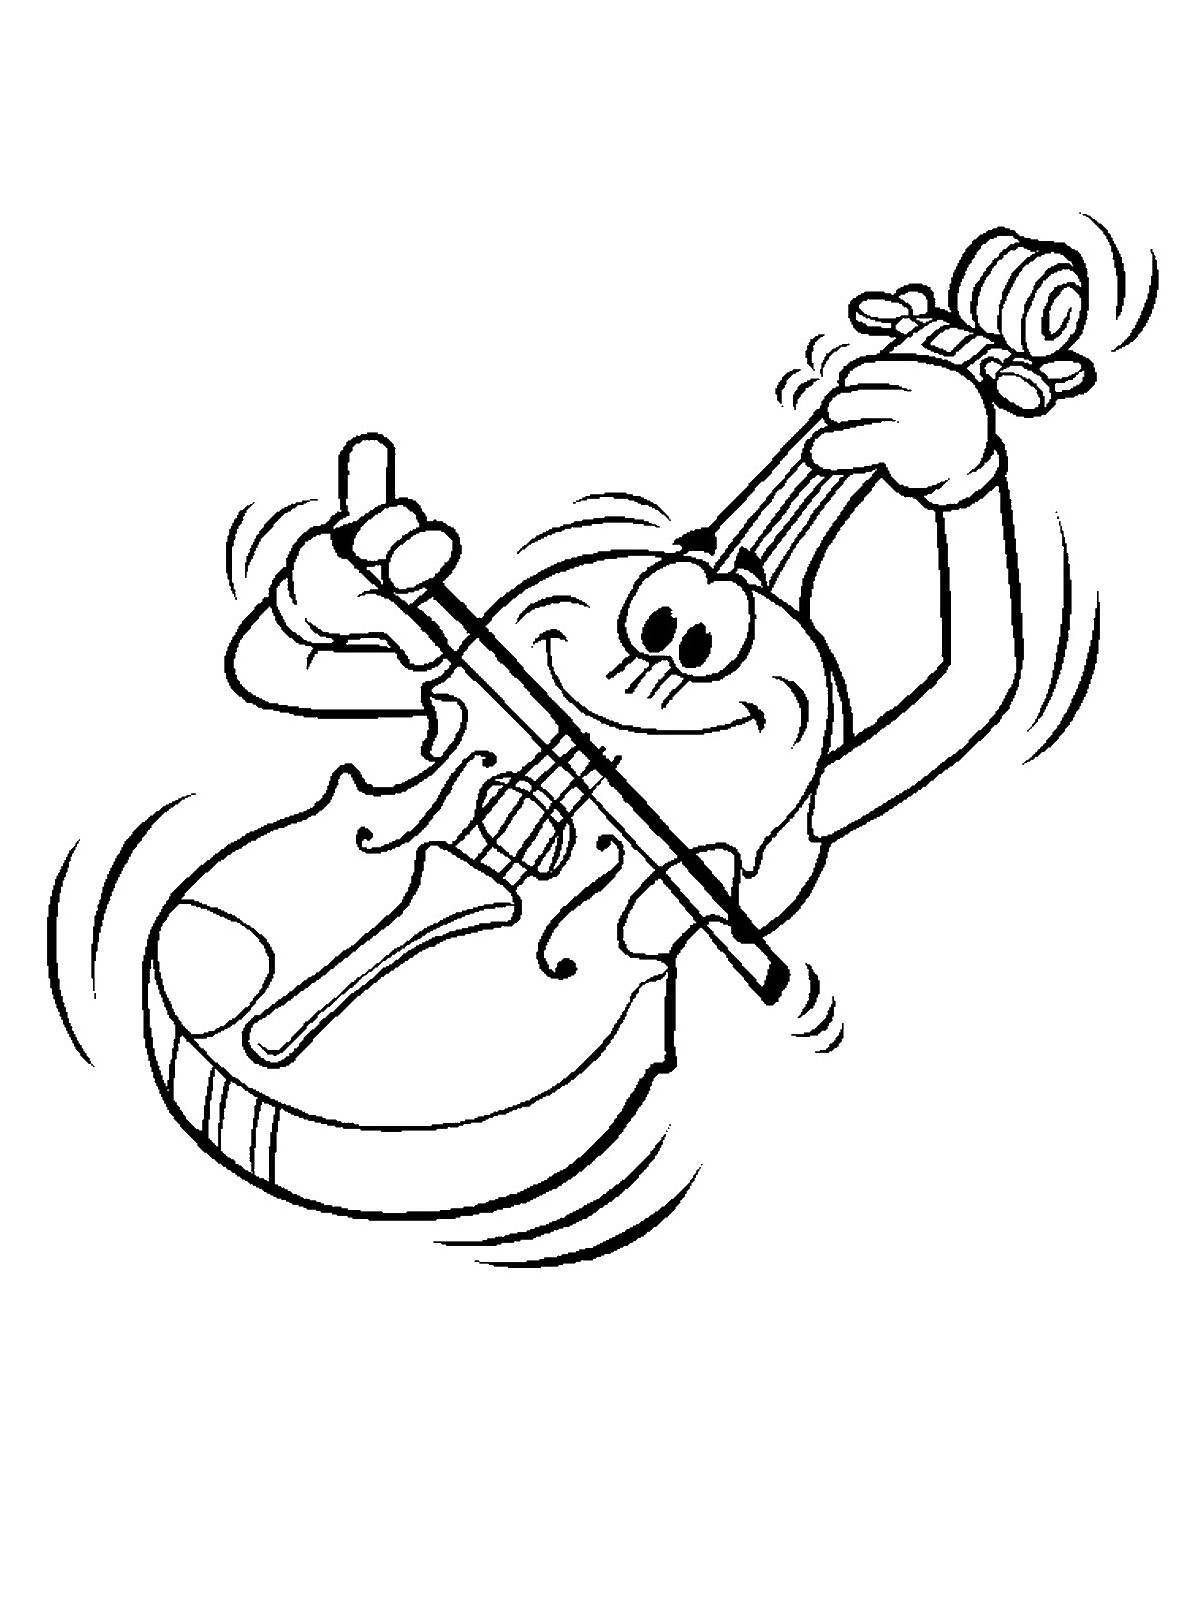 Beautifully Colored Violin Coloring Page